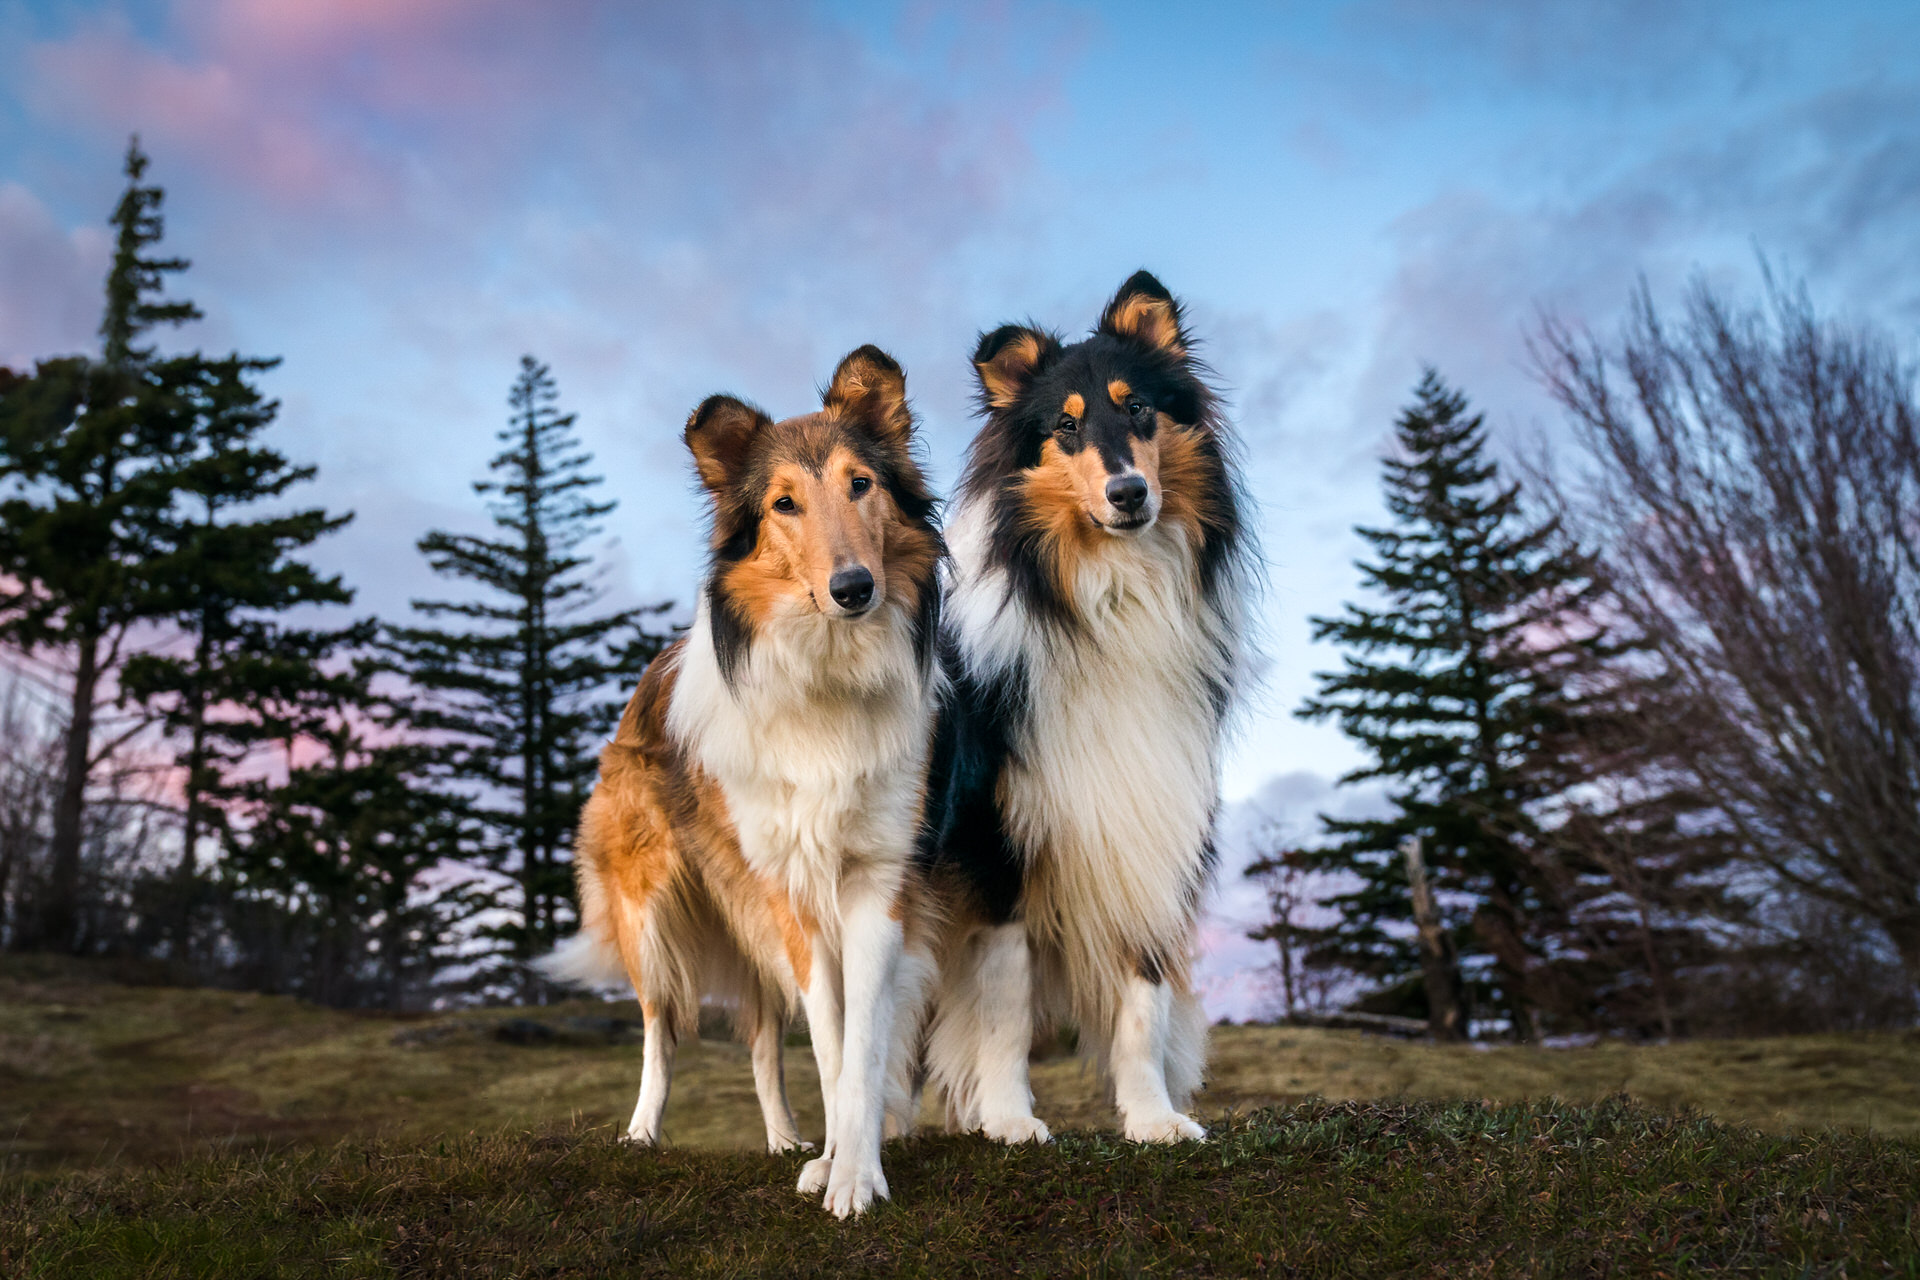 Two collie dogs stand together on a hill with pastel skies behind them